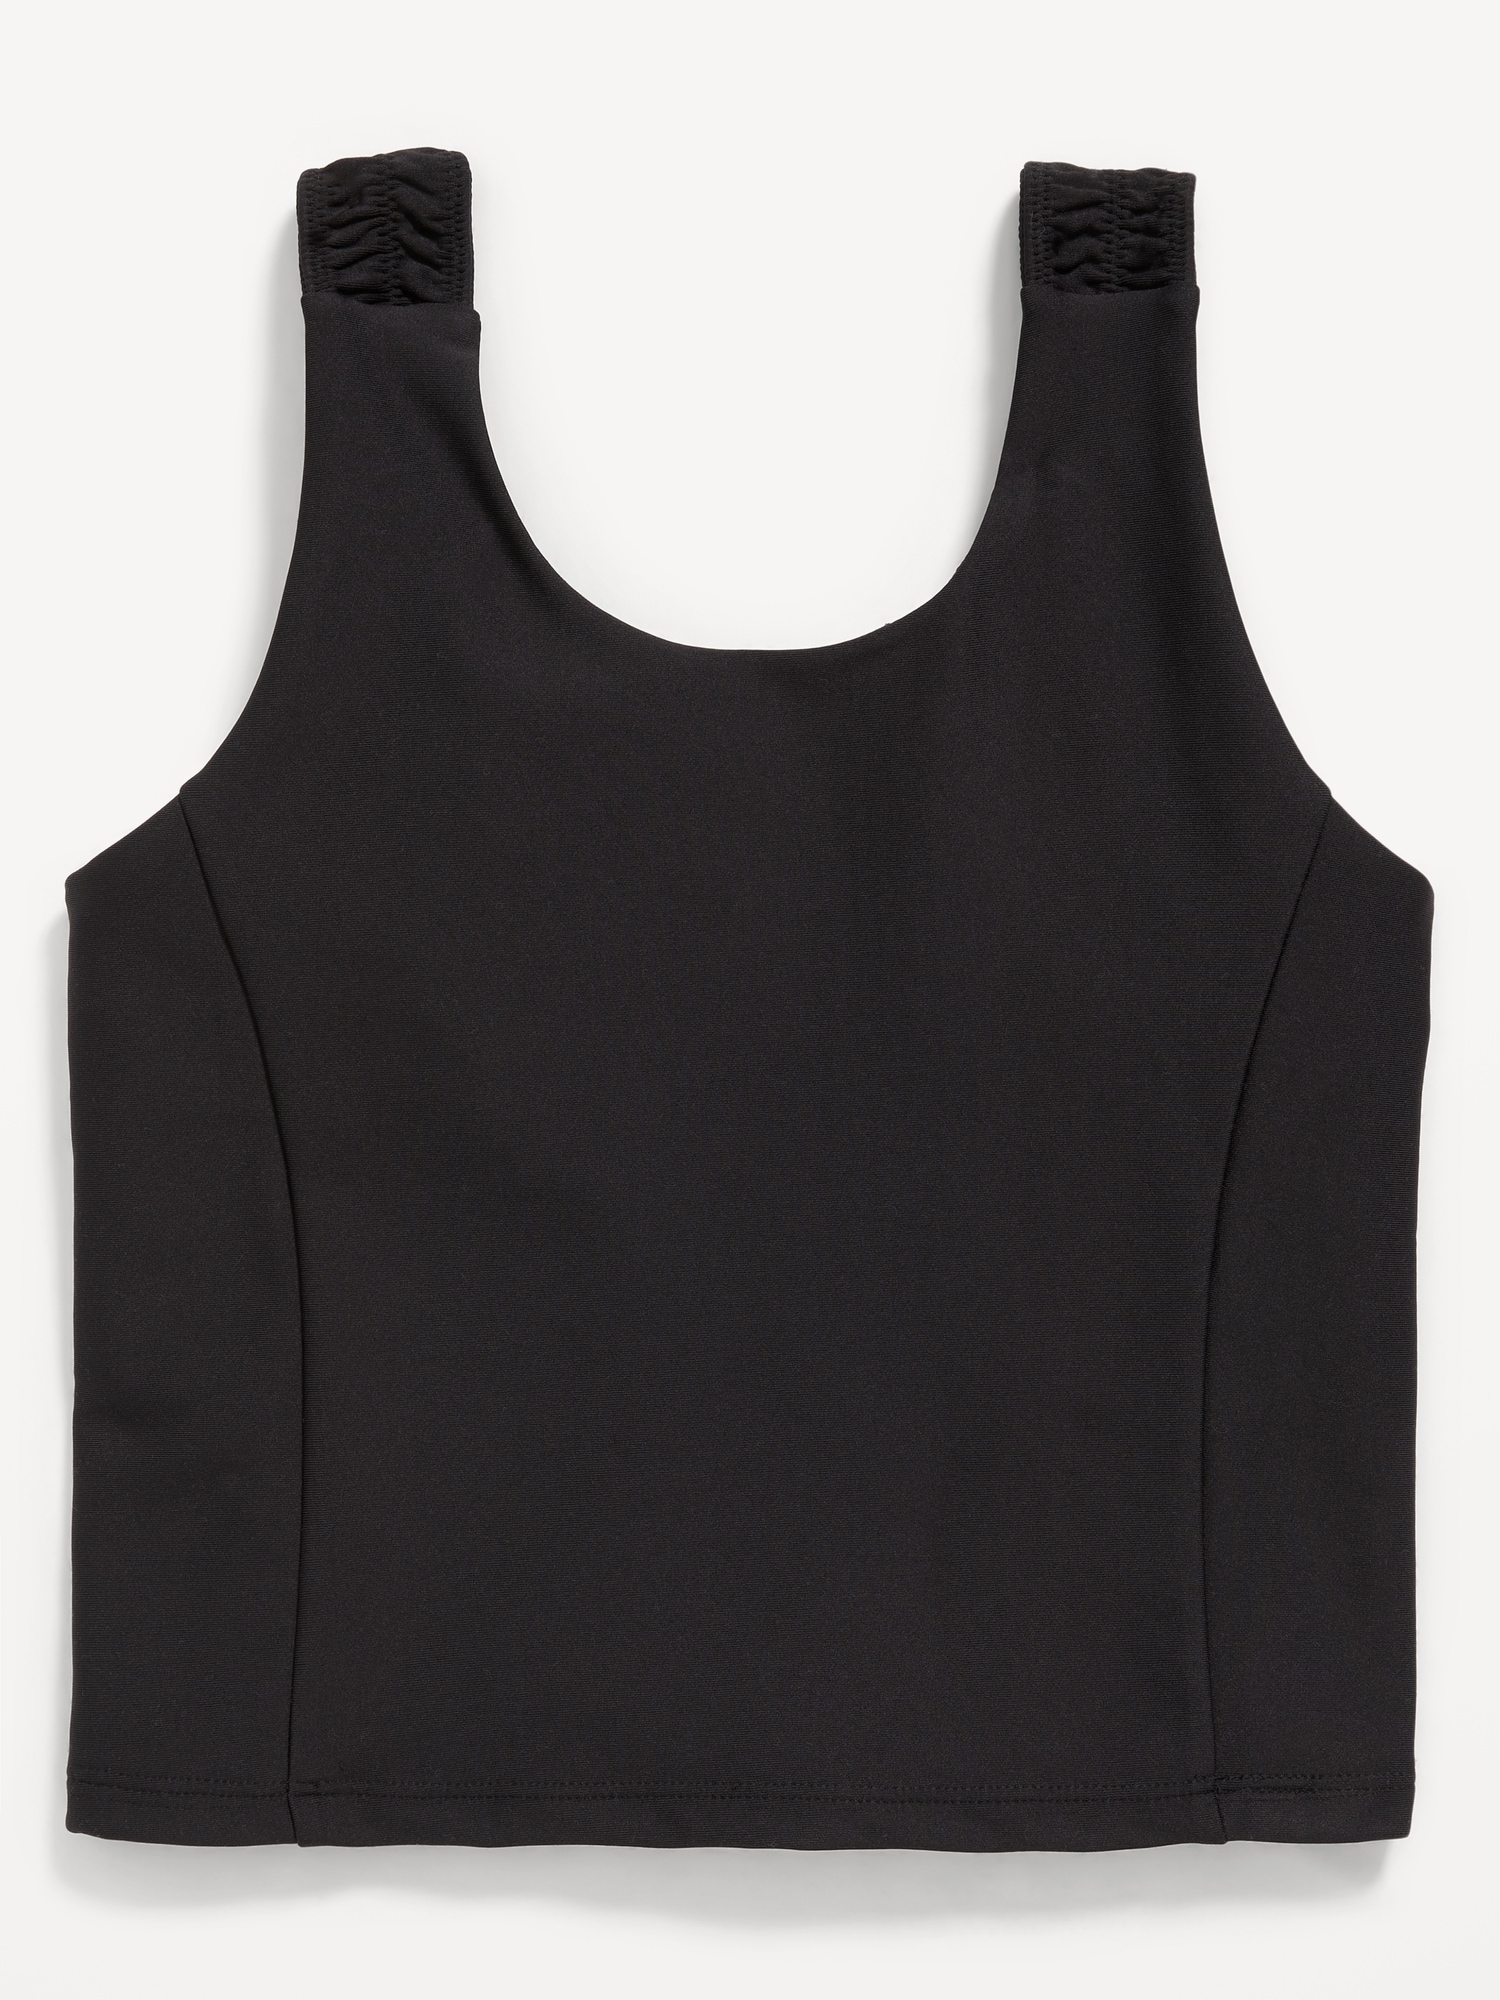 PowerSoft Ruched-Strap Tank Top for Girls Hot Deal